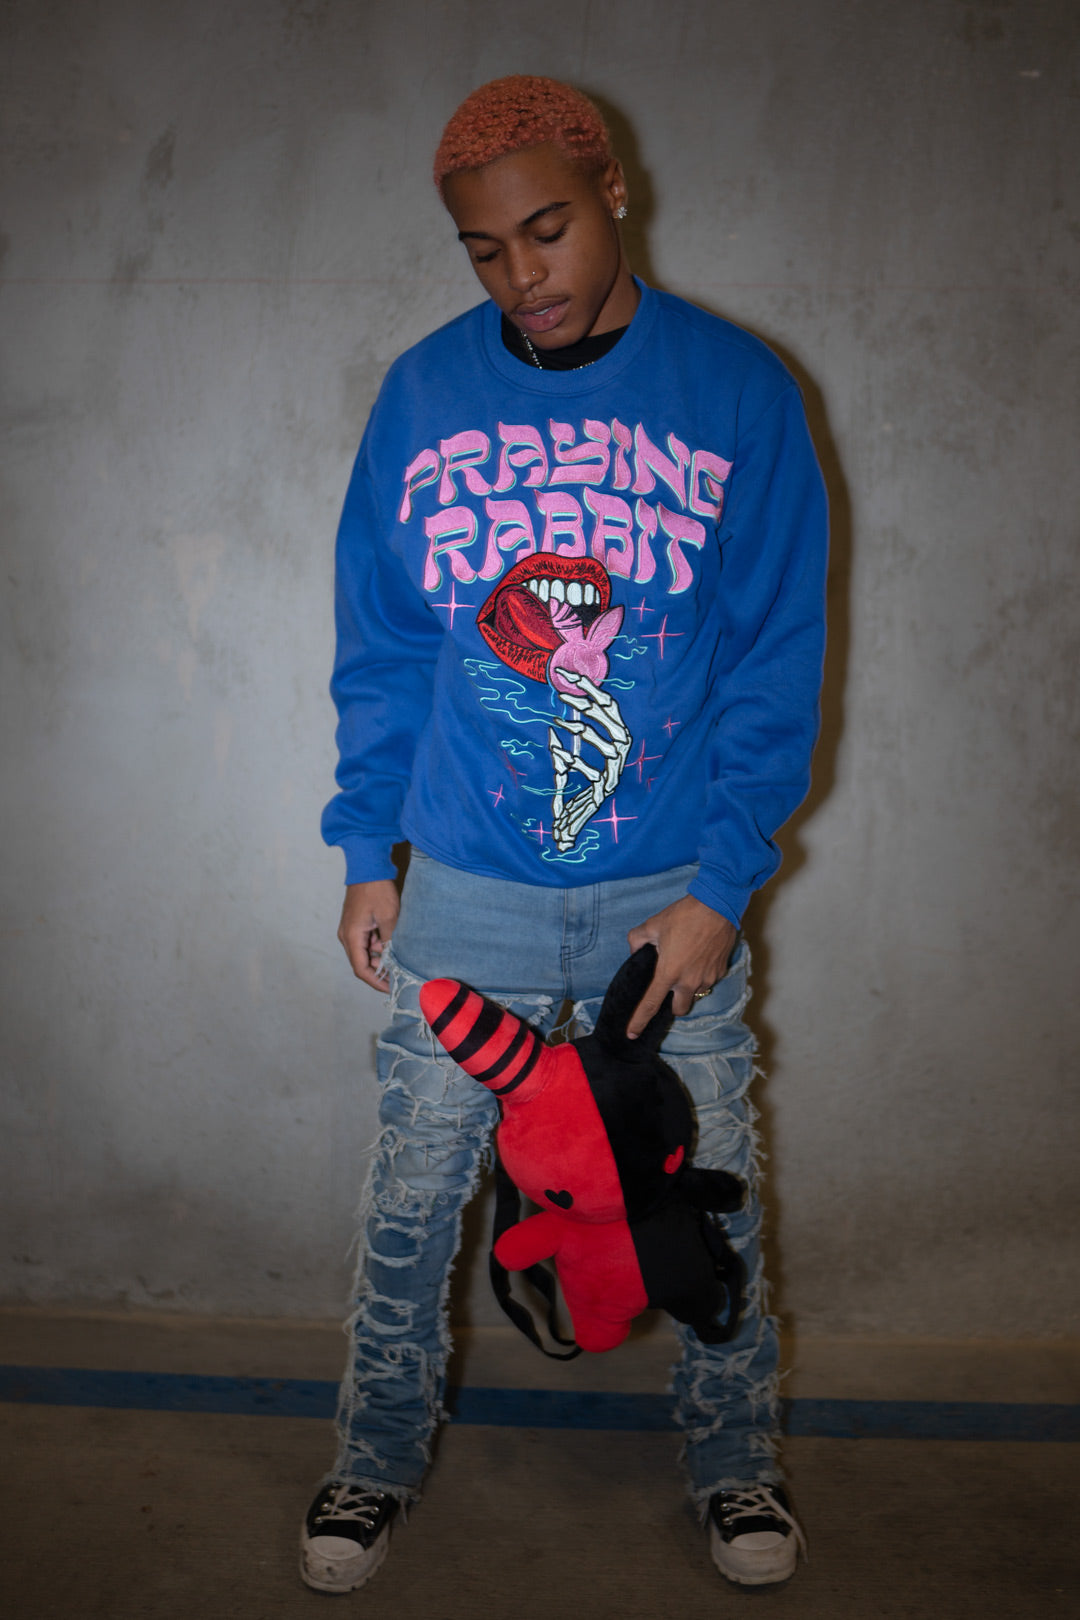 male model wearing candy blue embroidered crew neck with a design that shows a skeleton hand holding a rabbit lollipop. the model is also holding a red and black bunny plush